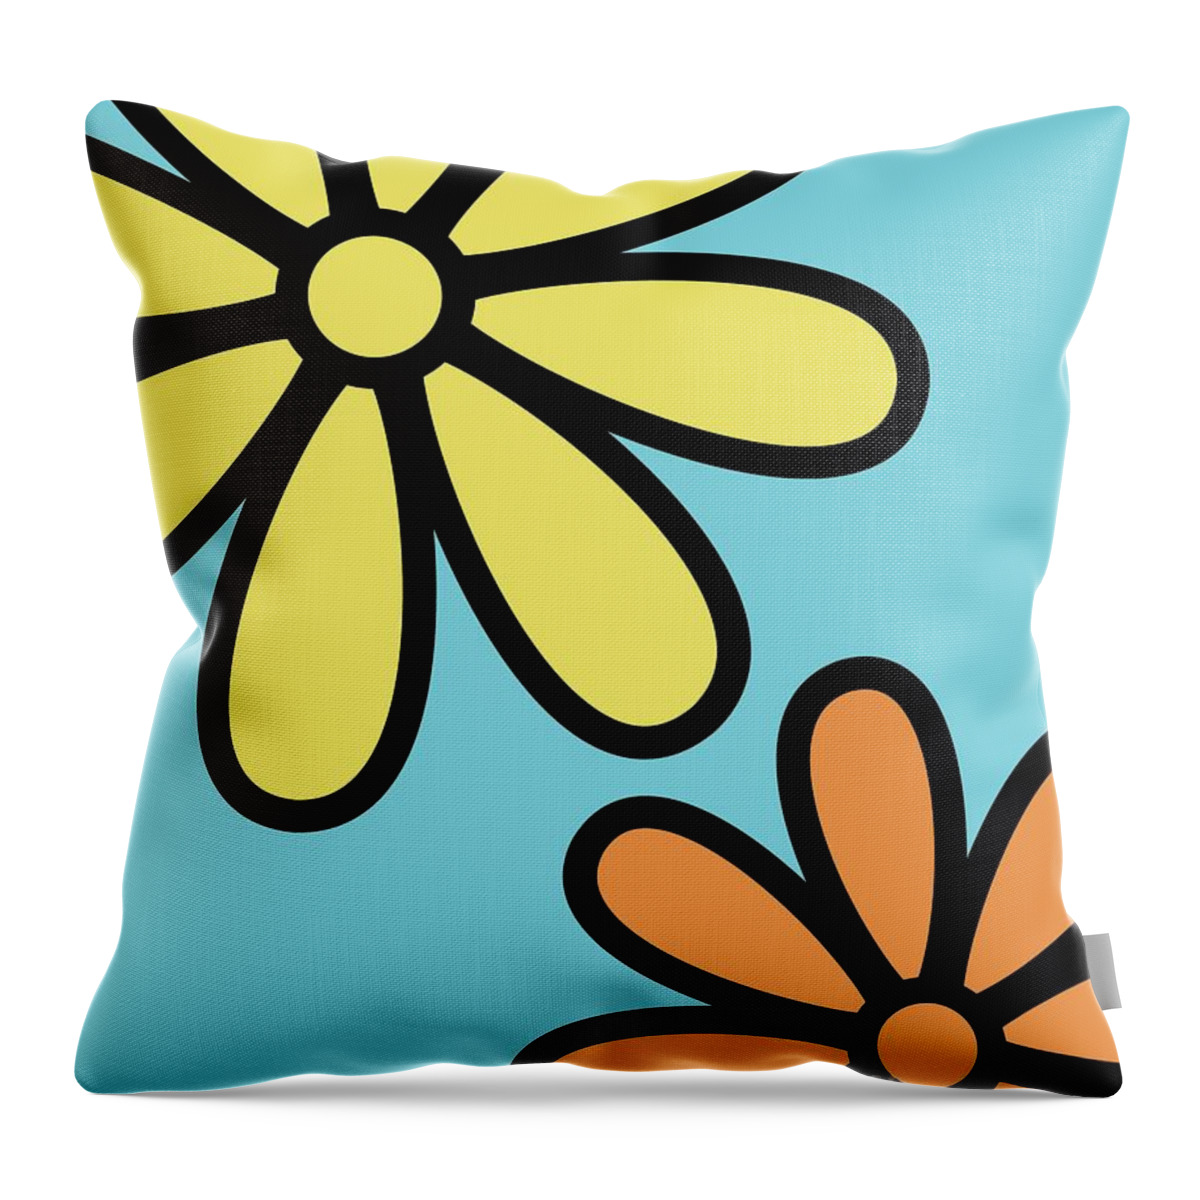 Mod Throw Pillow featuring the digital art Mod Flowers 3 on Blue by Donna Mibus